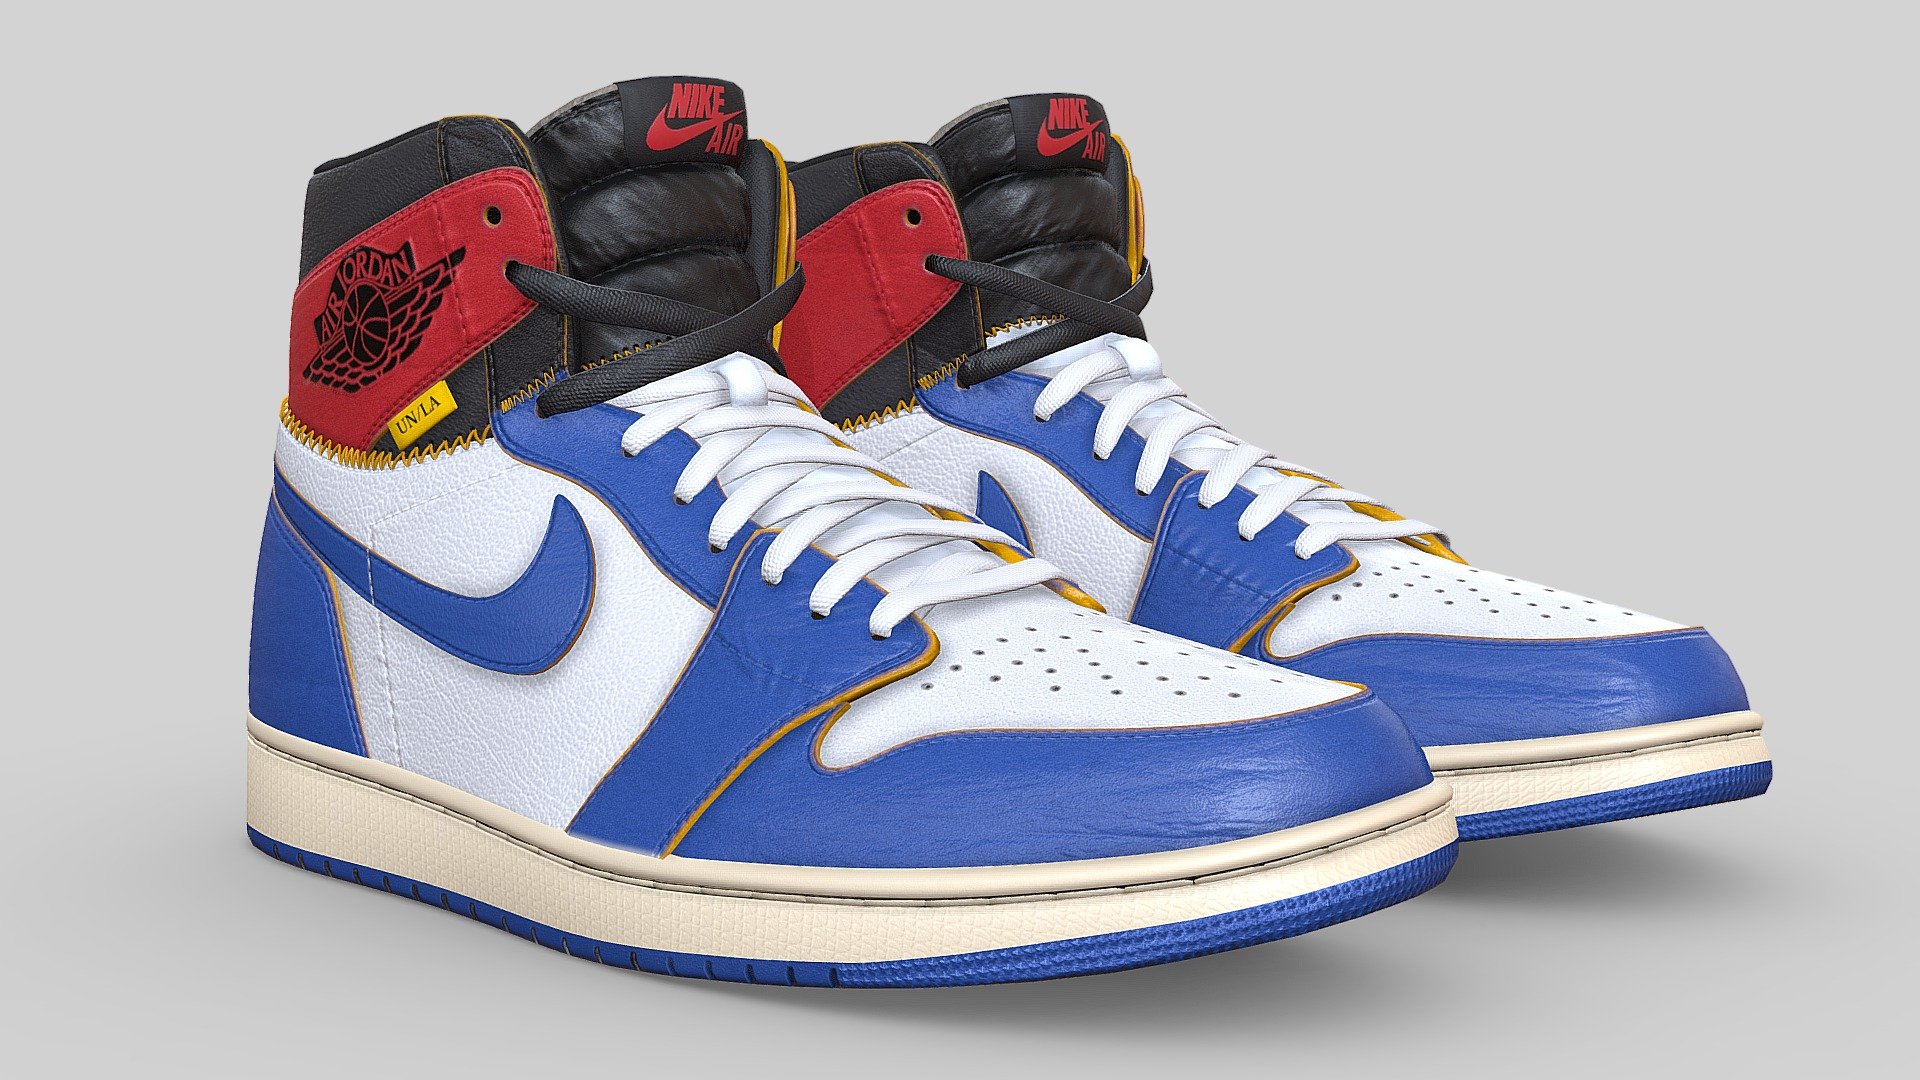 Optimised version of my Jordan 1 Union LA shoe model. 

Reduced polycount and the model uses just one texture set!

This Low Poly version is also included in the full version available here:
https://sketchfab.com/3d-models/jordan-1-union-la-retro-high-nrg-storm-blue-73a8b67525d9457bab660d91386ce051 - Jordan 1 Union LA Storm Blue Game Ready - 3D model by Joe-Wall (@joewall) 3d model